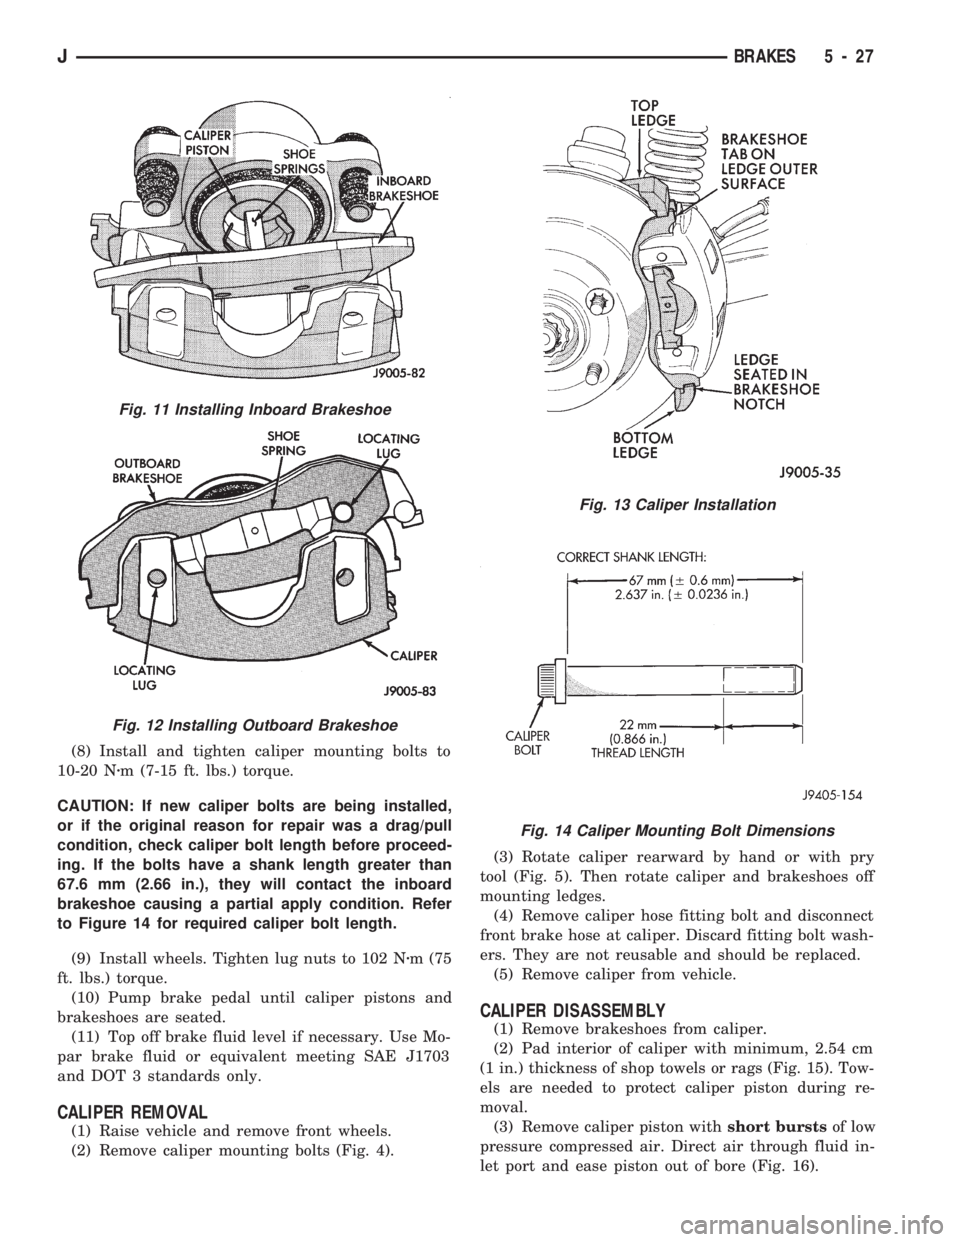 JEEP WRANGLER 1994  Owners Manual Fig. 12 Installing Outboard Brakeshoe
Fig. 13 Caliper Installation
Fig. 14 Caliper Mounting Bolt Dimensions
JBRAKES 5 - 27 